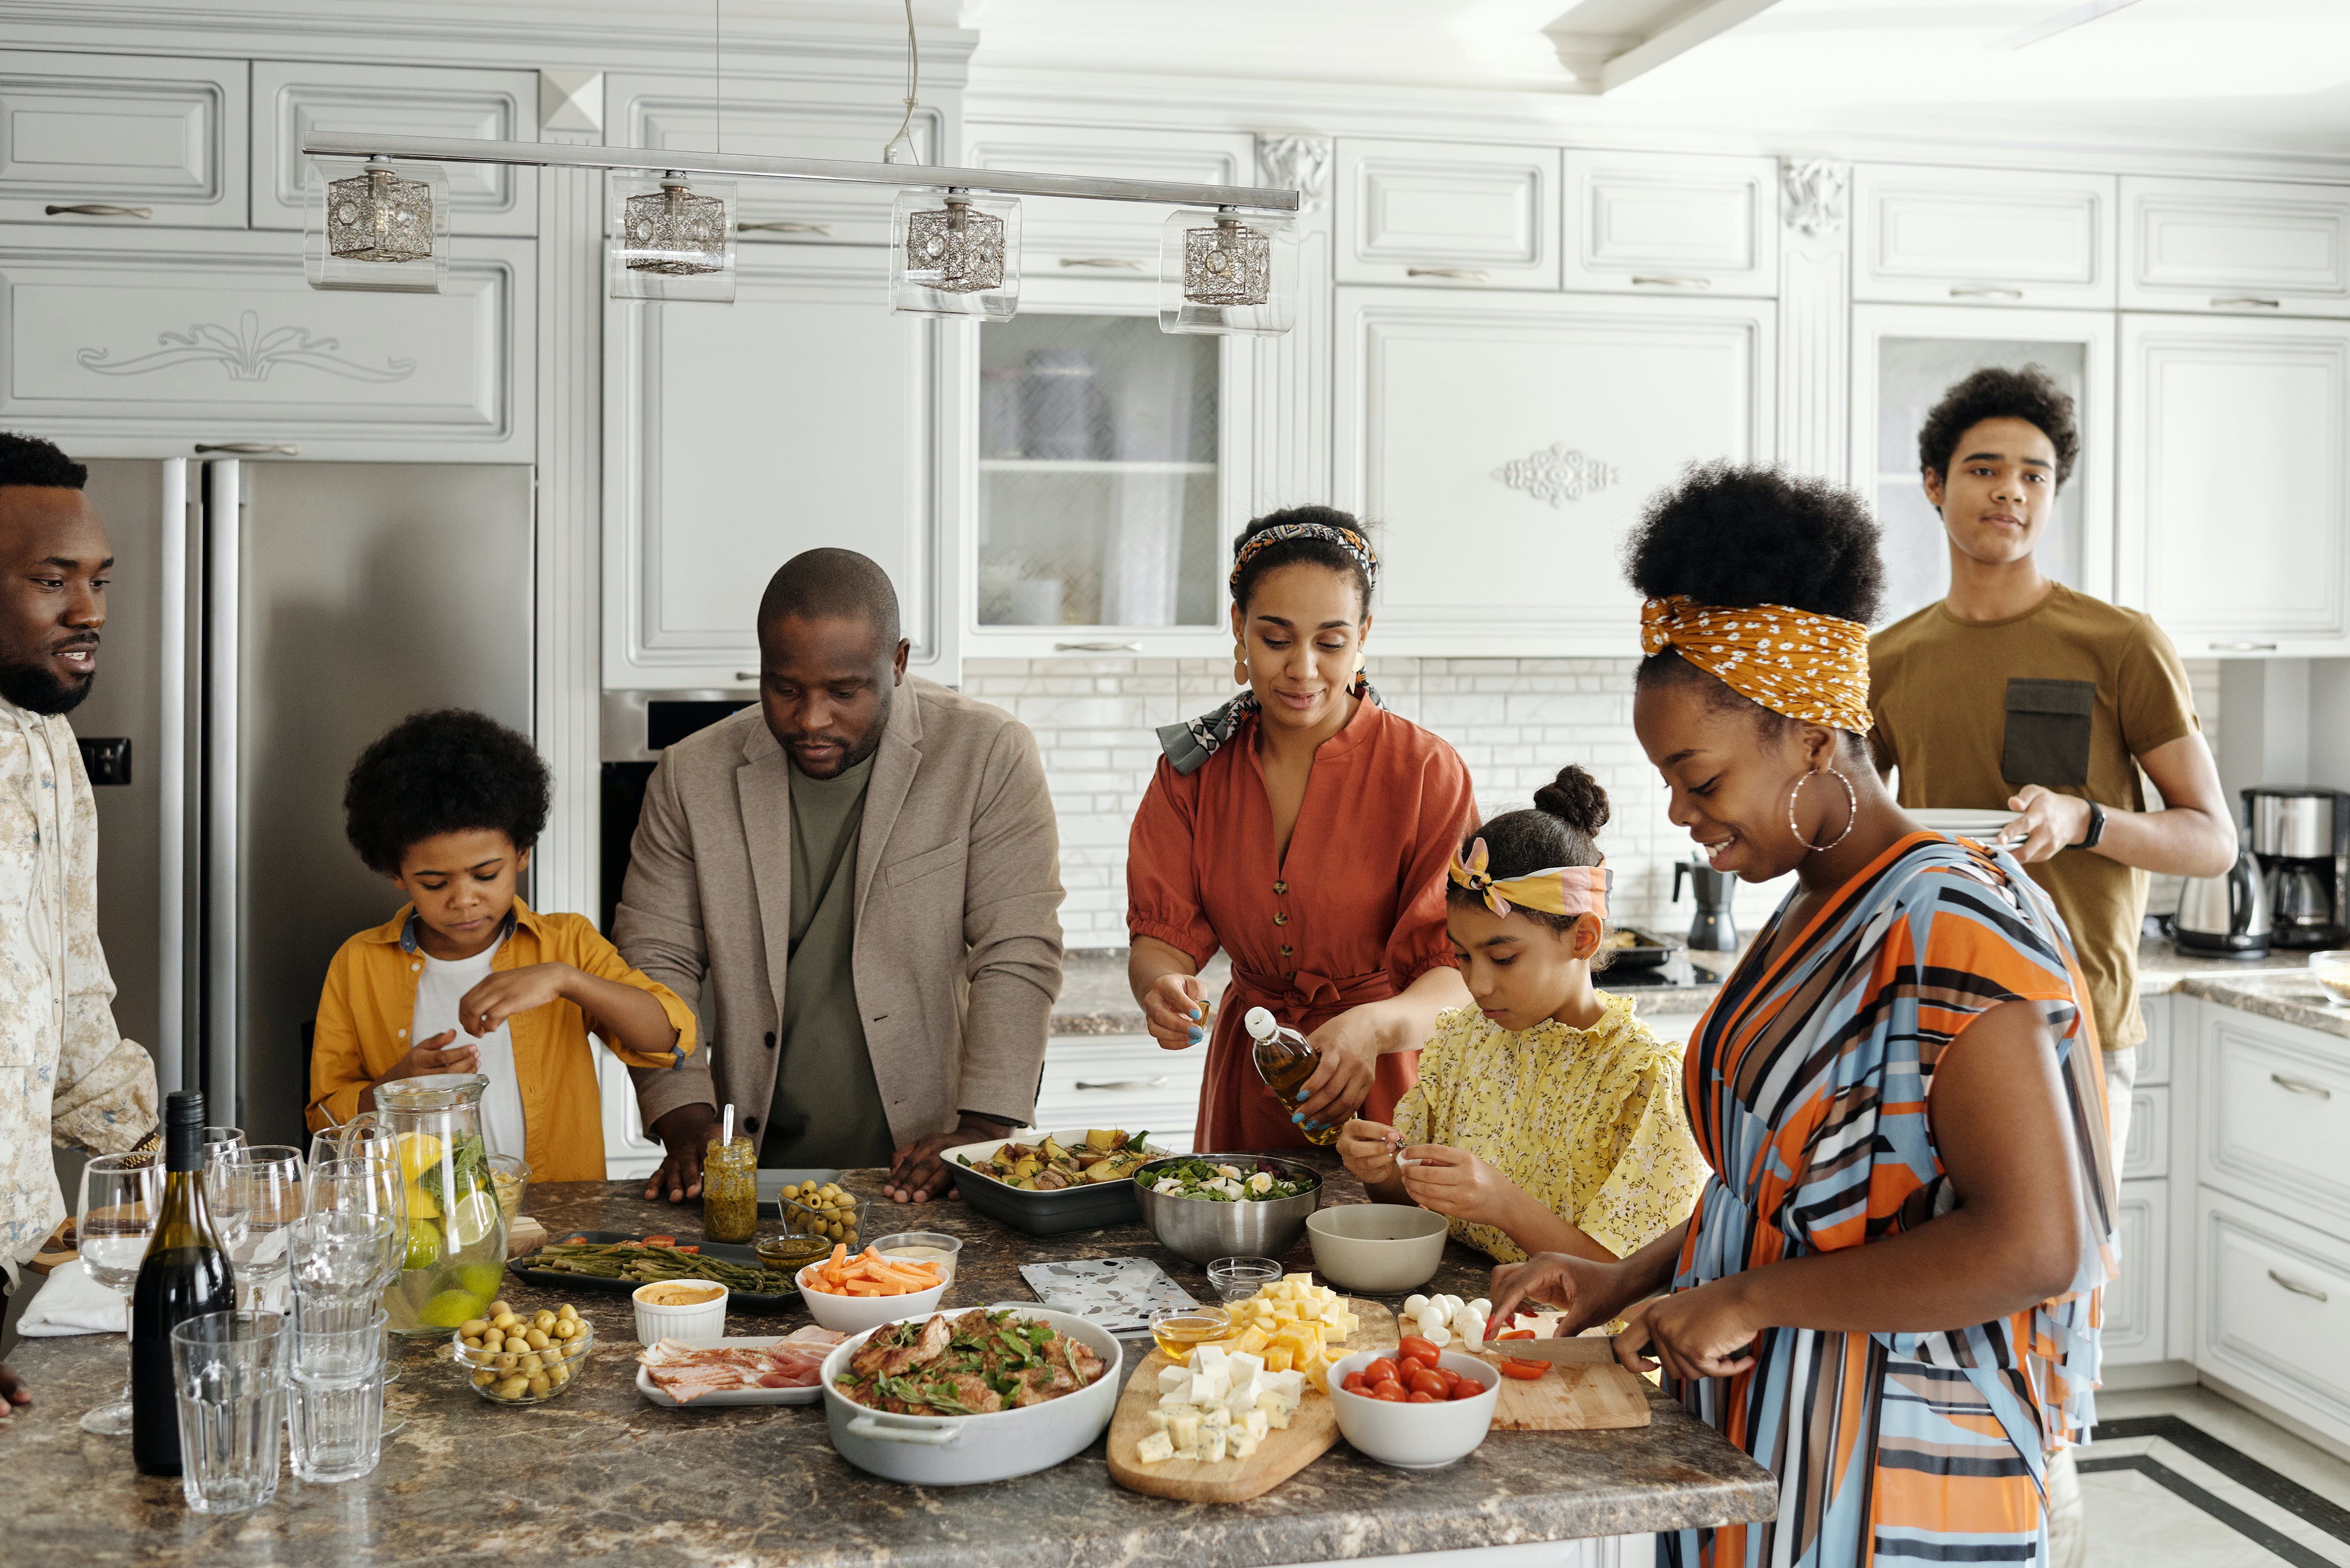 A family helping to prepare a holiday meal | Source: Pexels